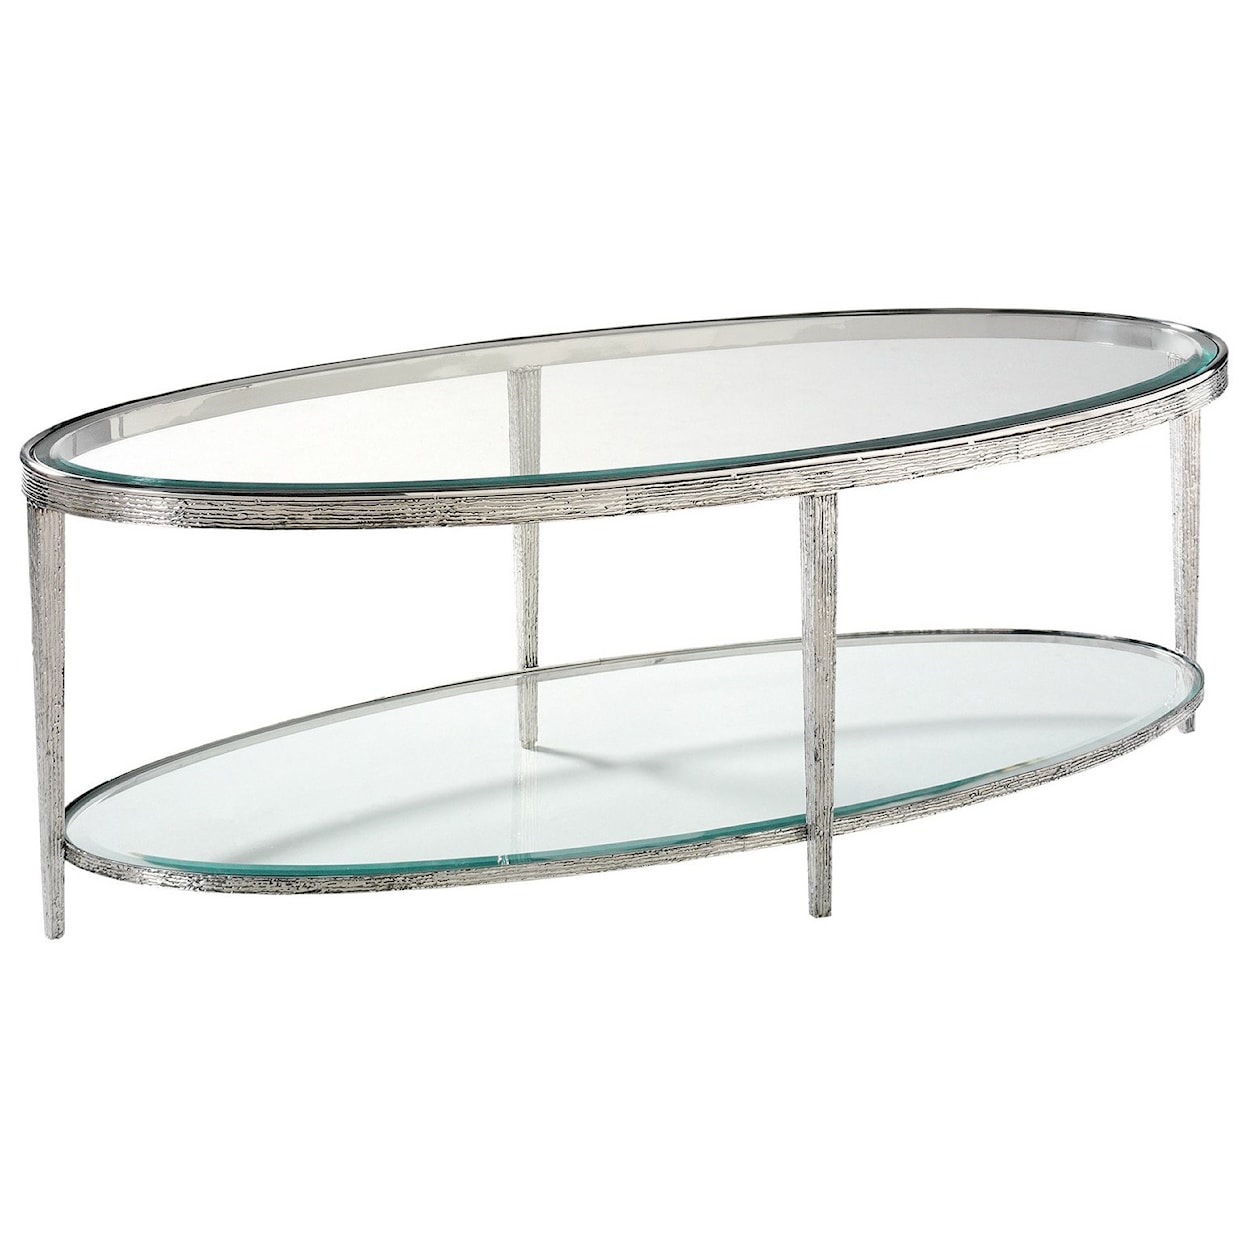 Hancock & Moore H & M Occasional Jinx Nickel Cocktail Table - Oval